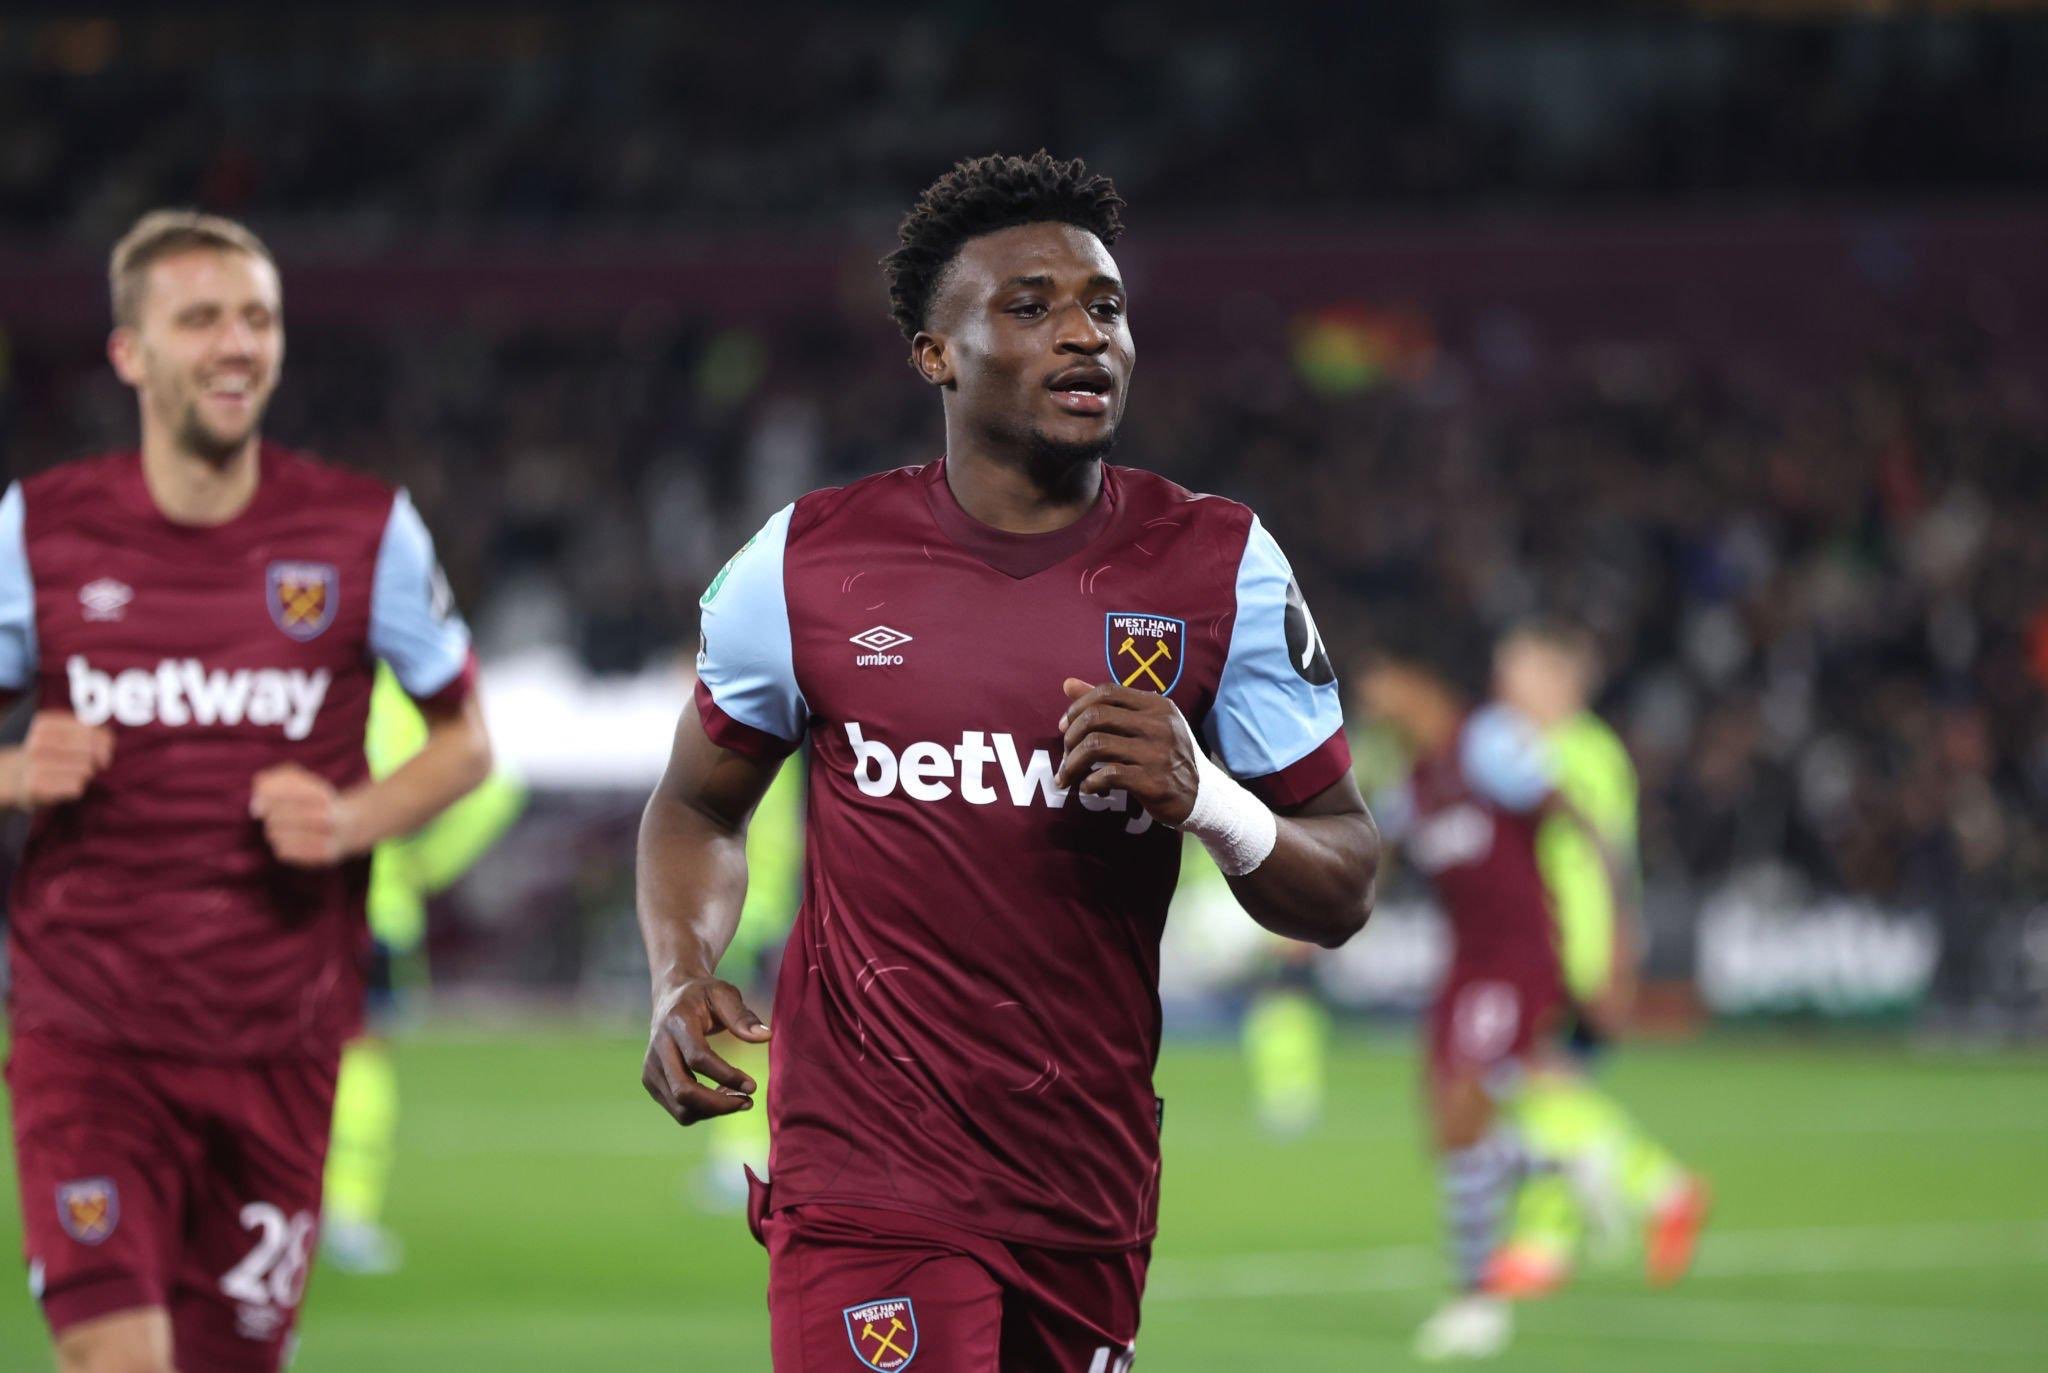 Ghana midfielder Mohammed Kudus scores as West Ham beat Arsenal in Carabao Cup